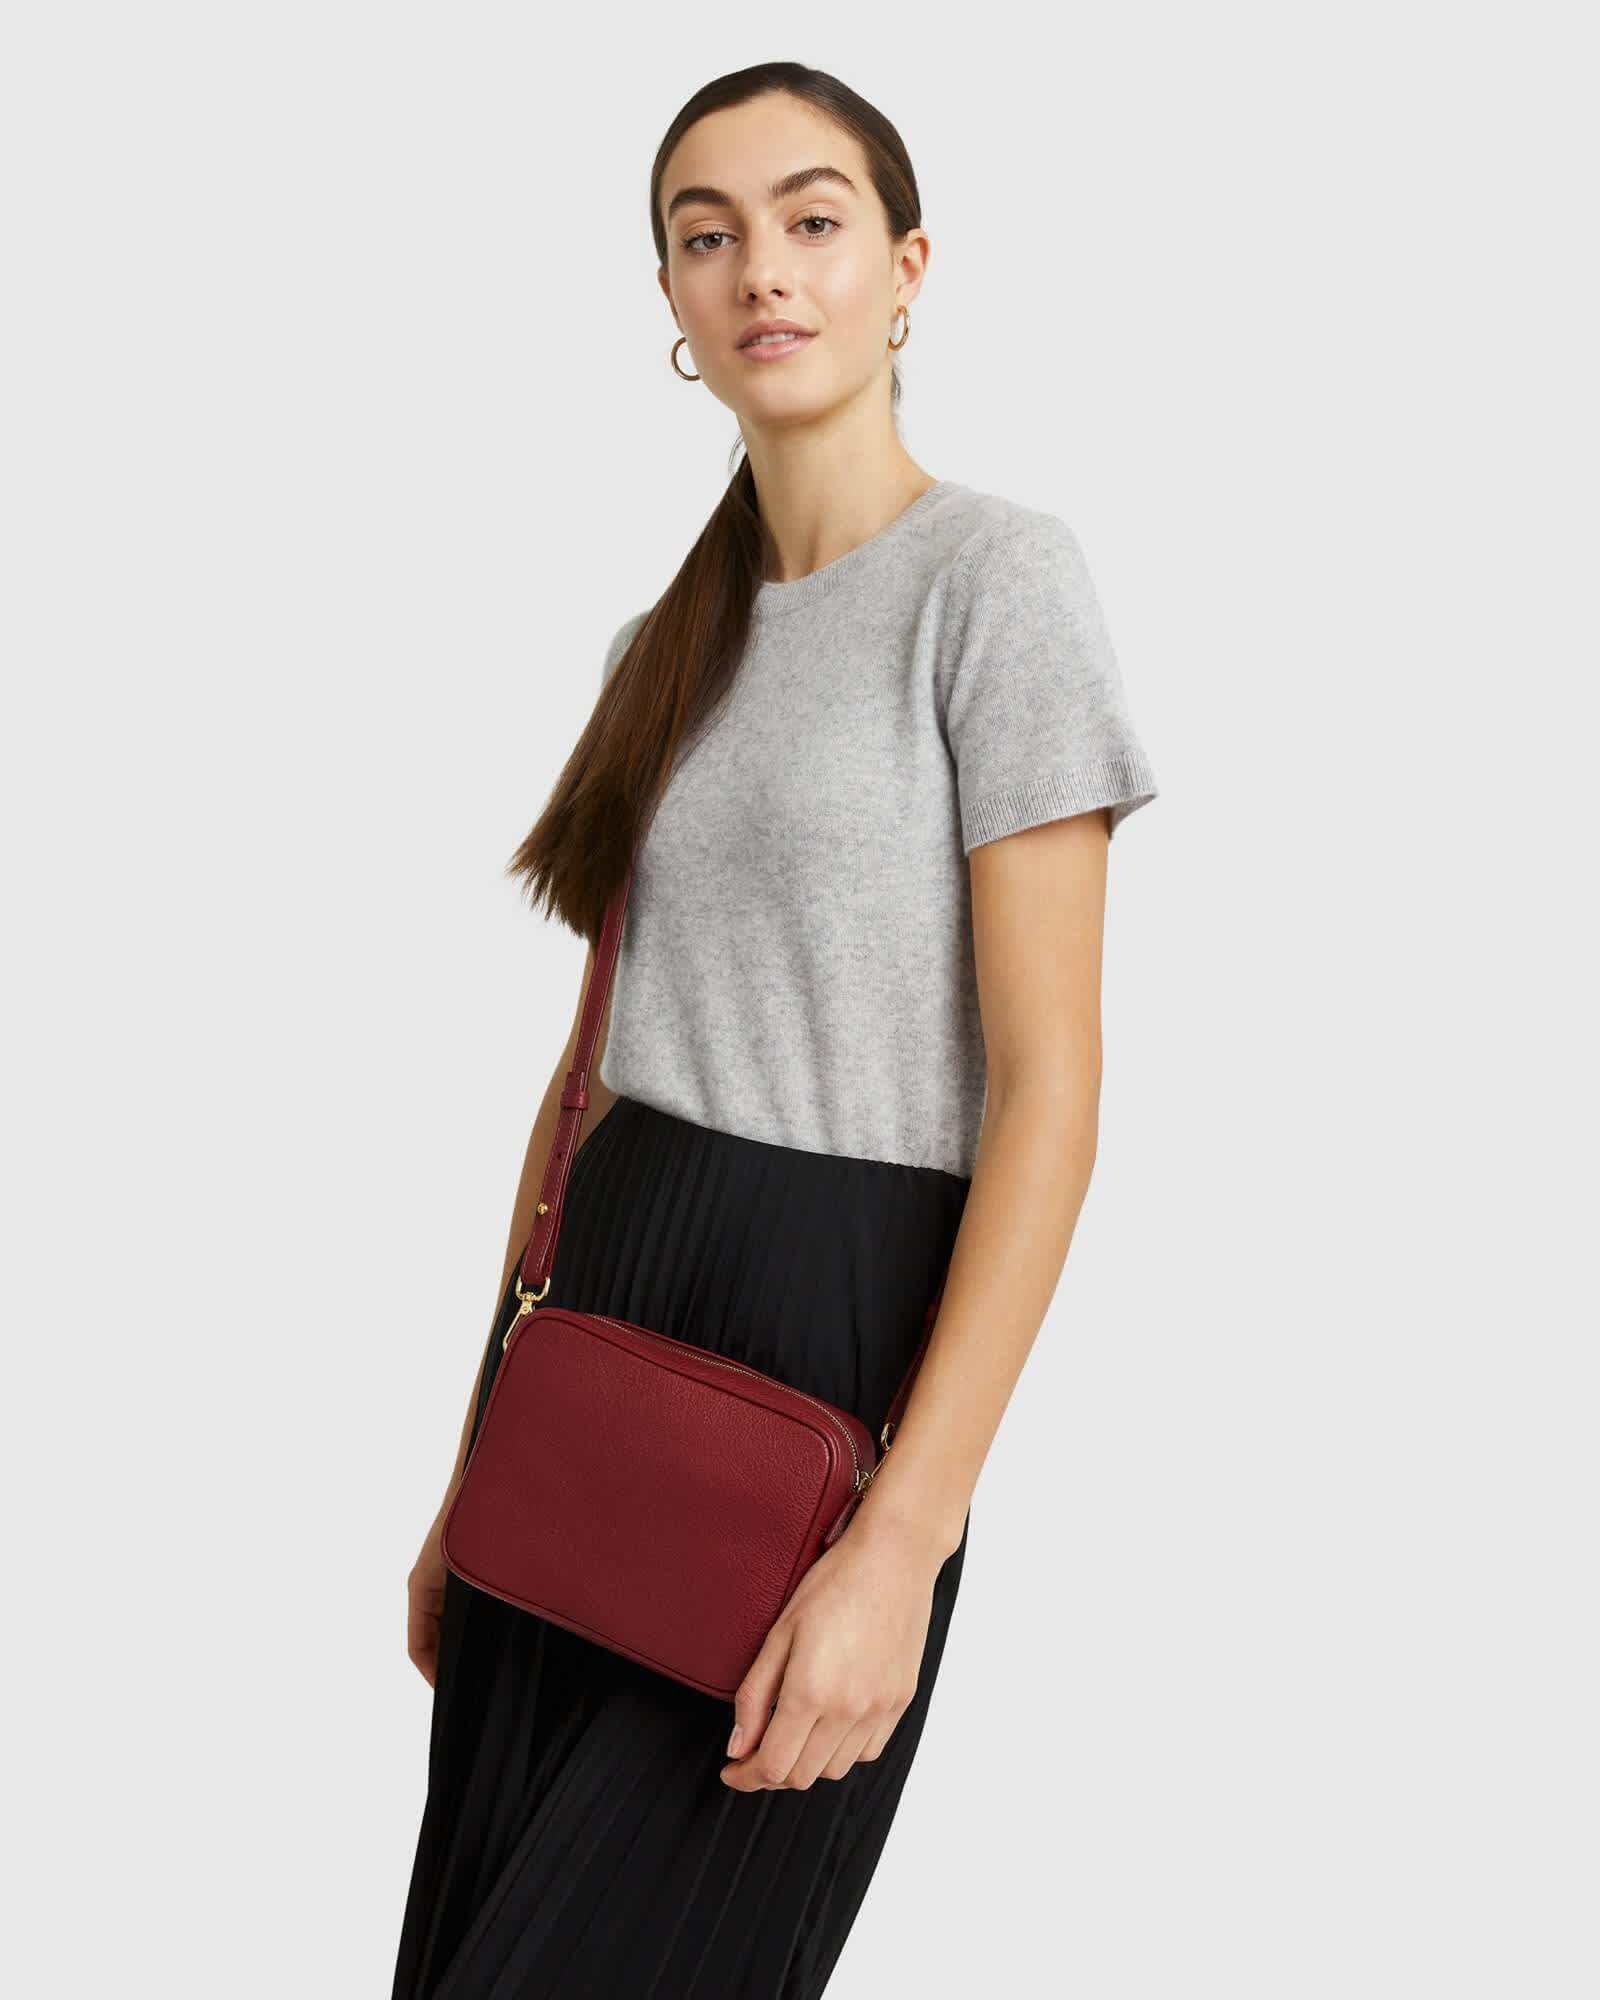 woman wearing Italian leather crossbody bag in red standing